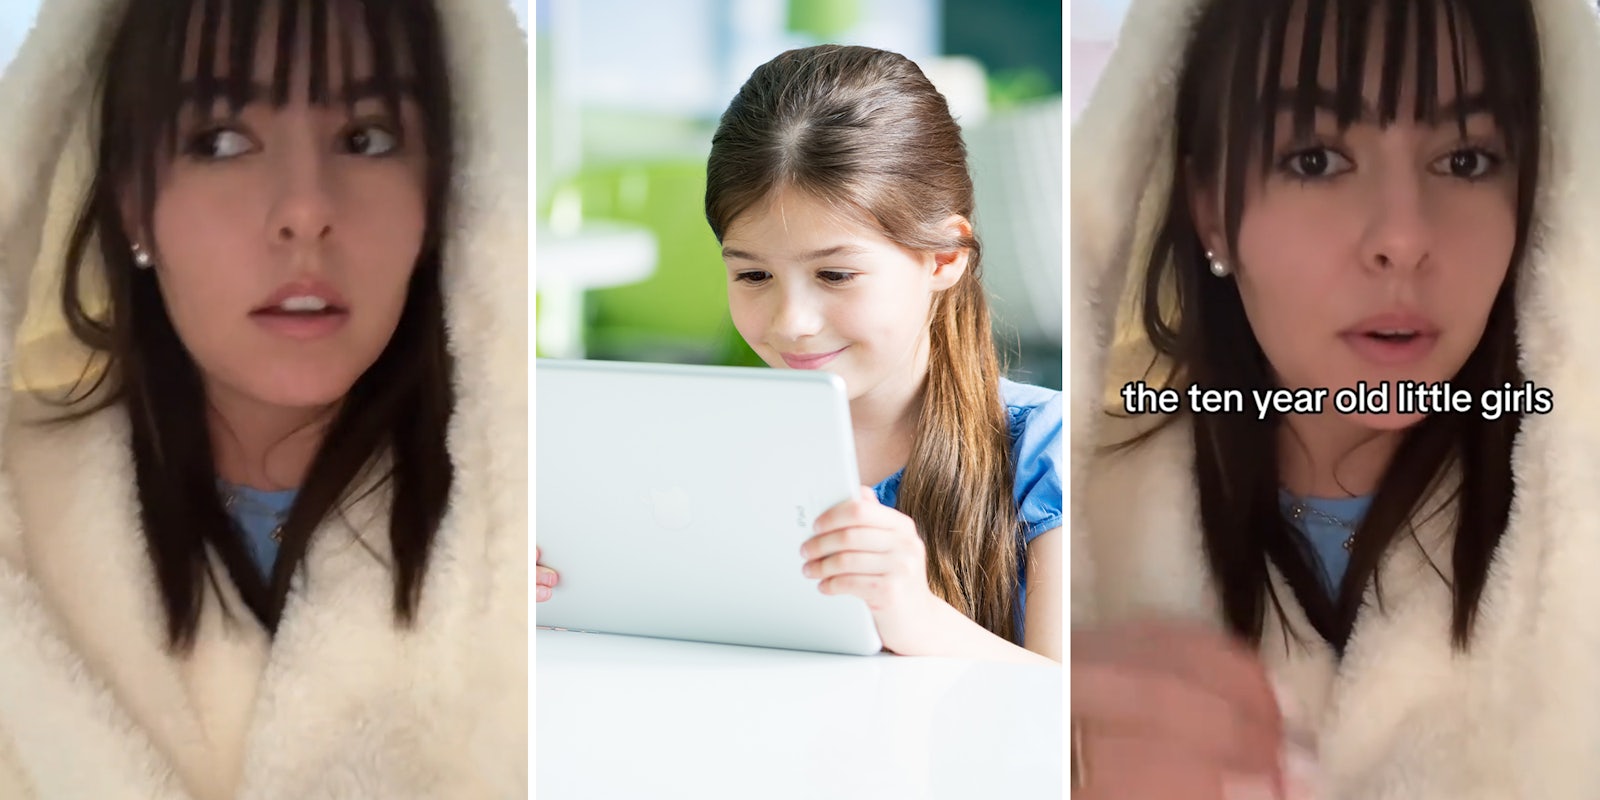 Women says 10-year-old girls at Sephora just the start of troubling 'iPad kids' generation